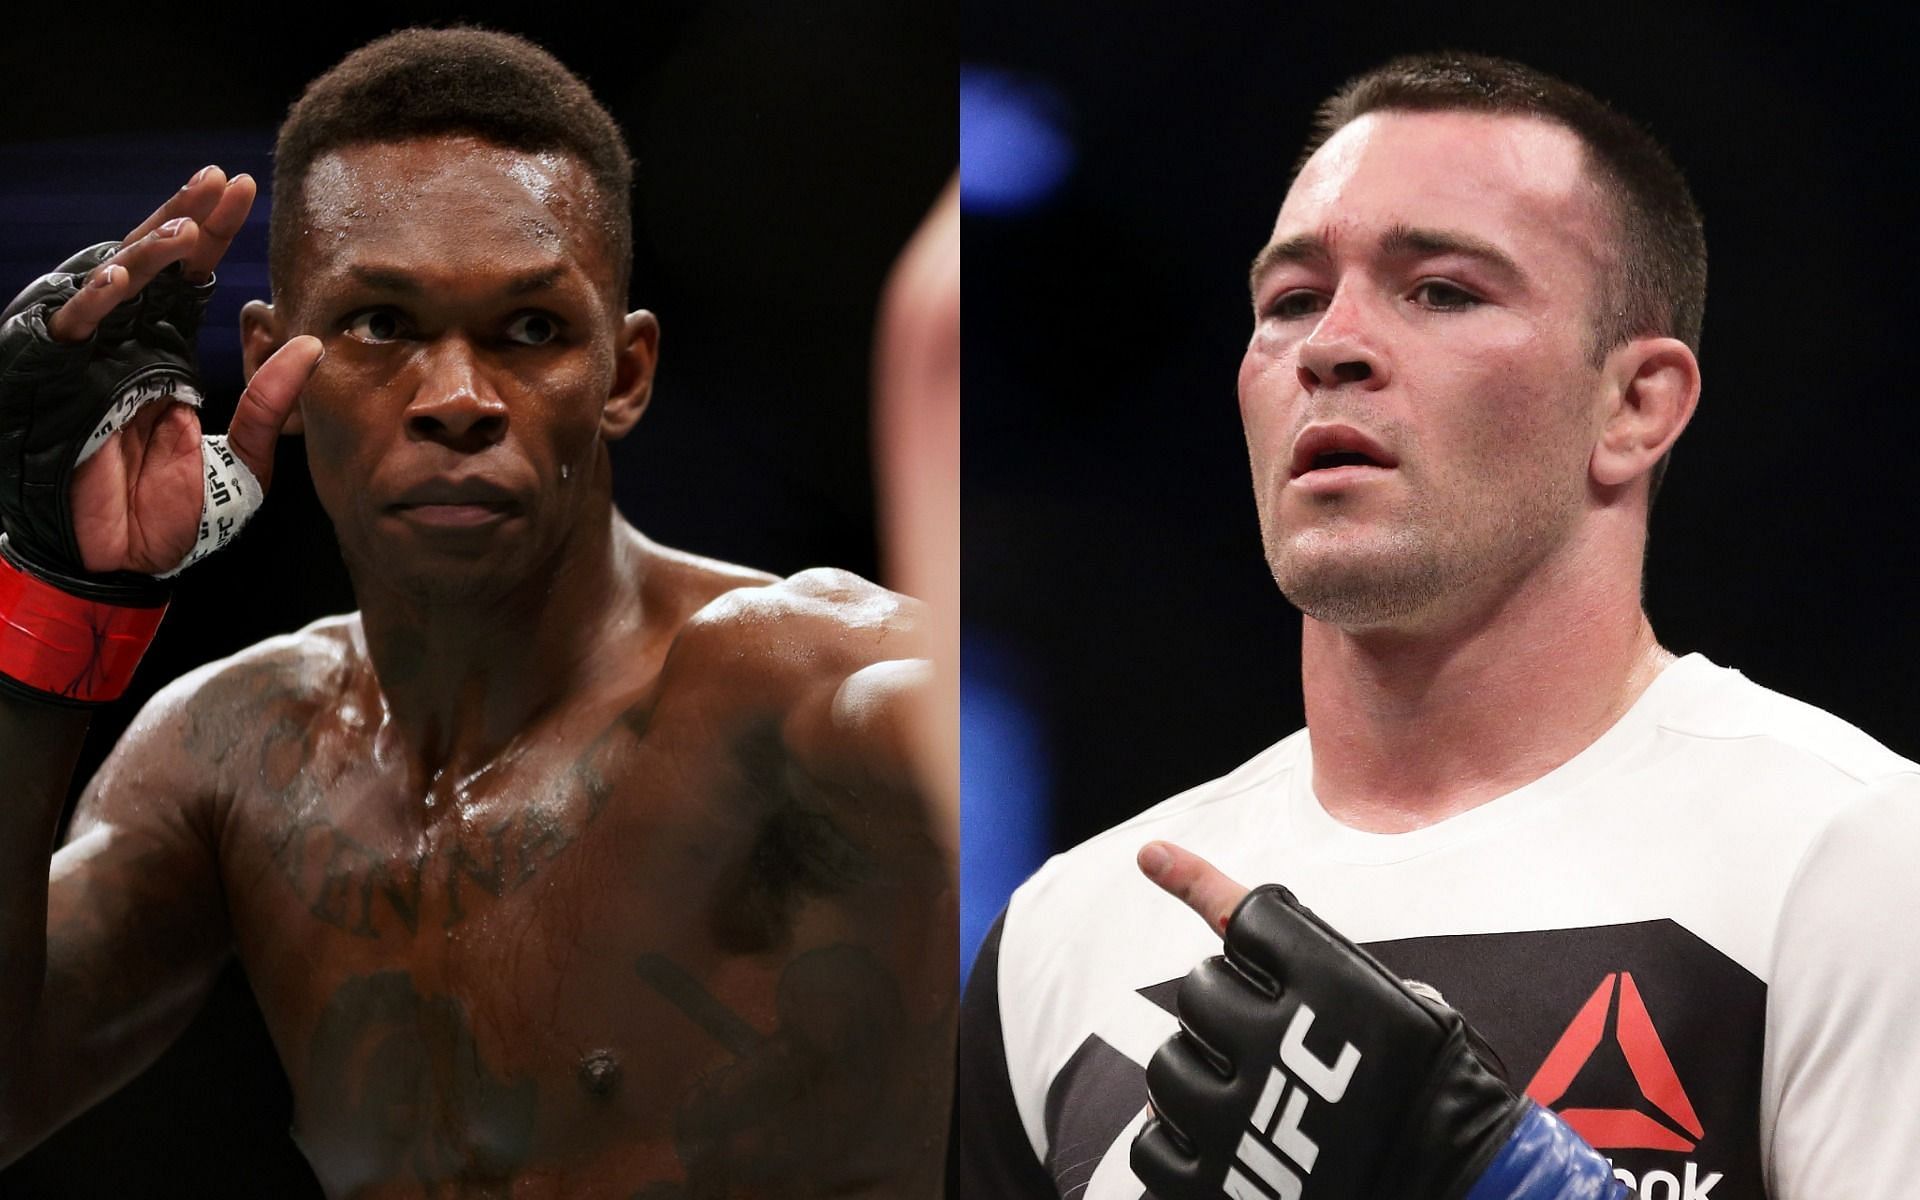 Israel Adesanya (left) and Colby Covington (right)